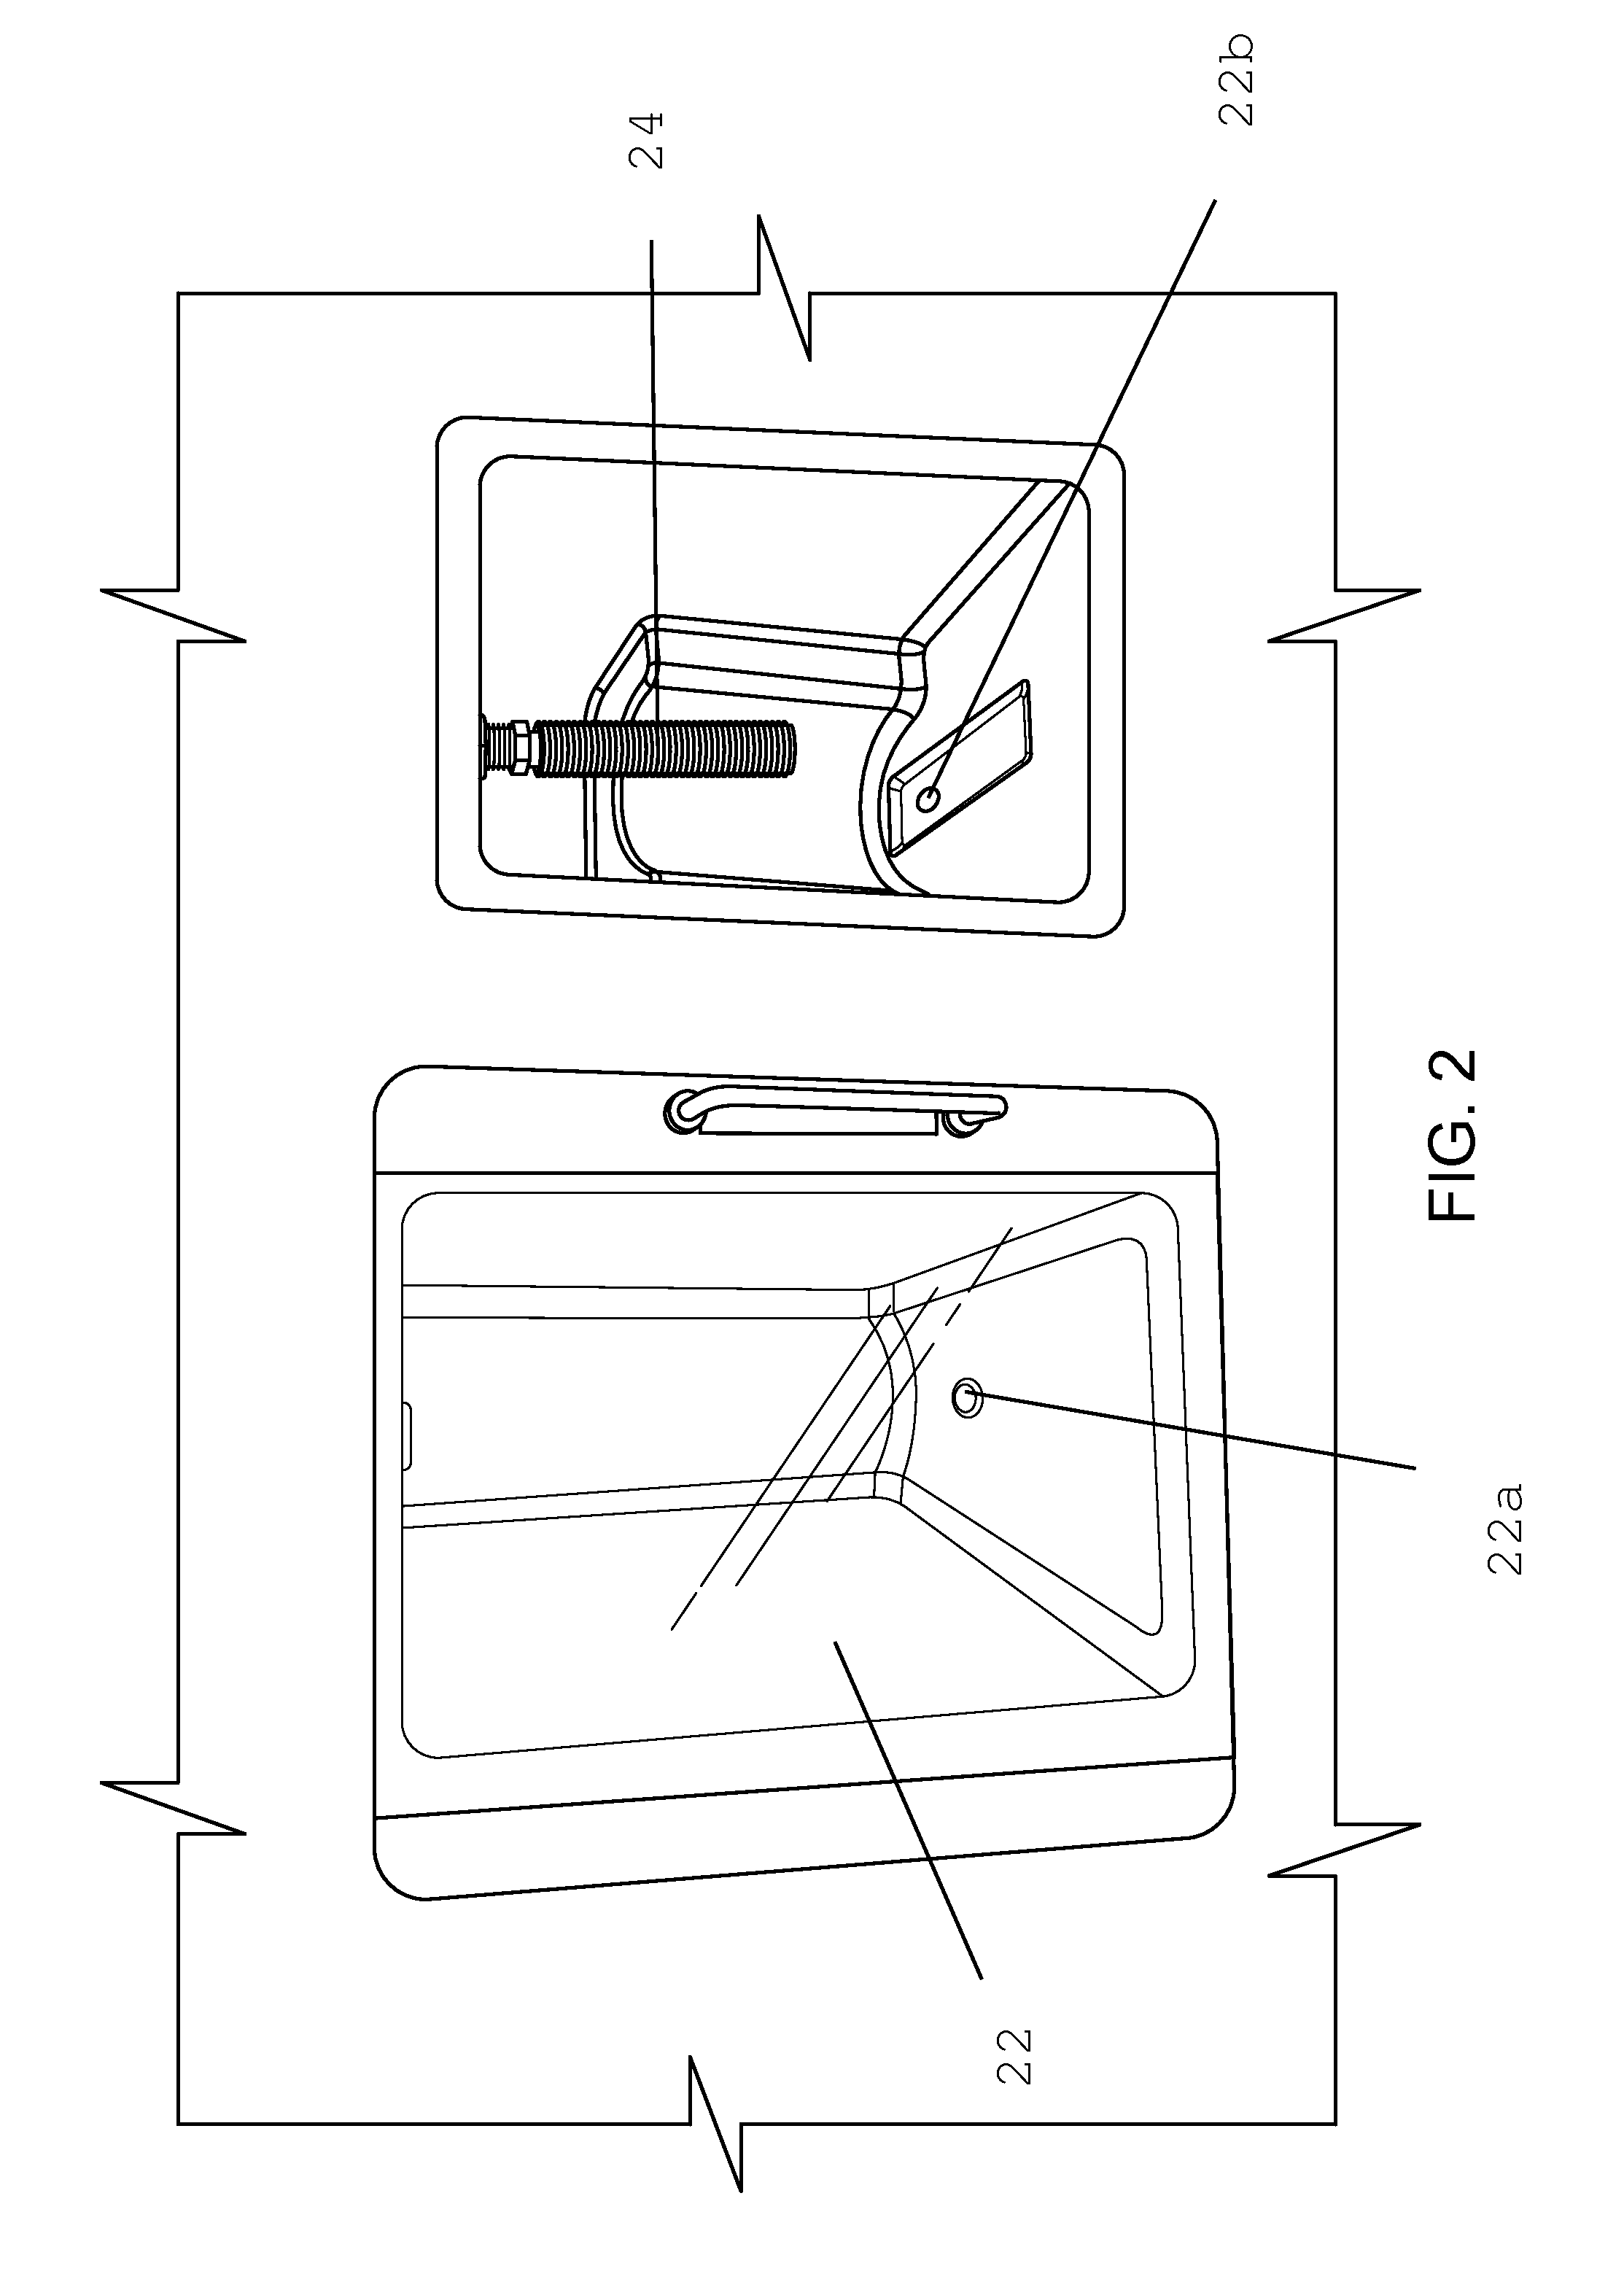 Cleaning product dispensing system